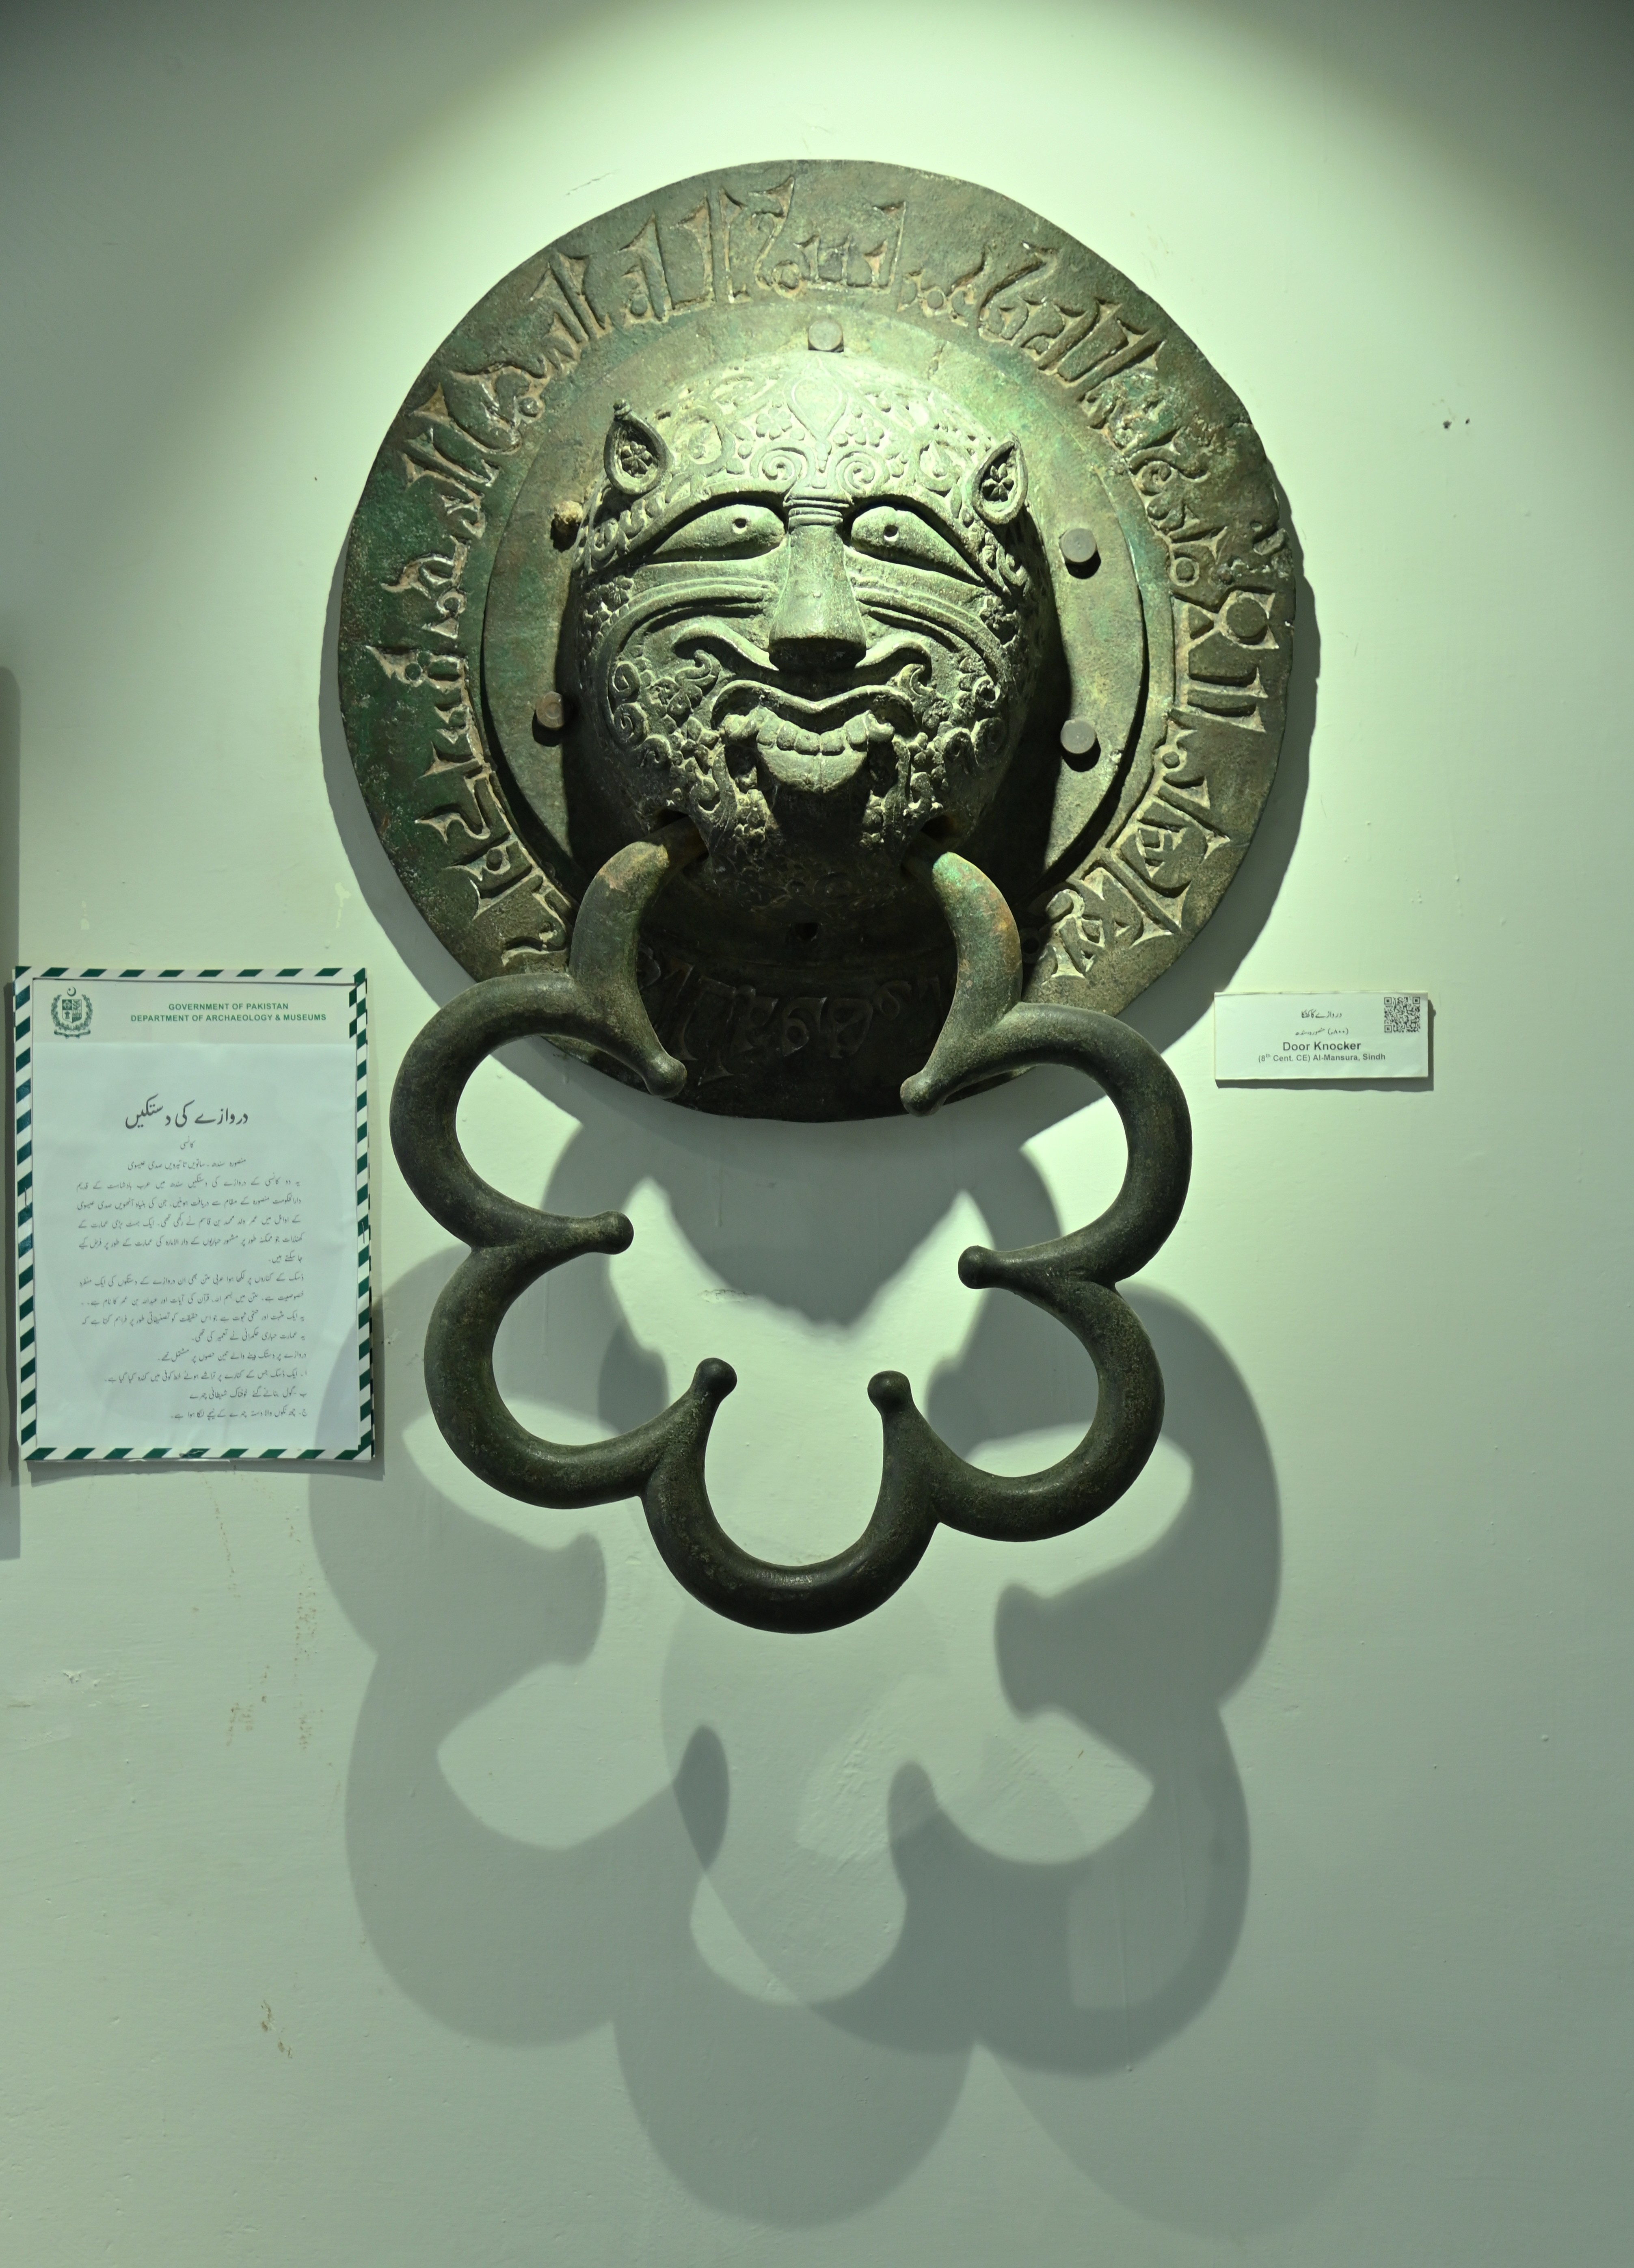 The Bronze Door knocker discovered from the Mansura site